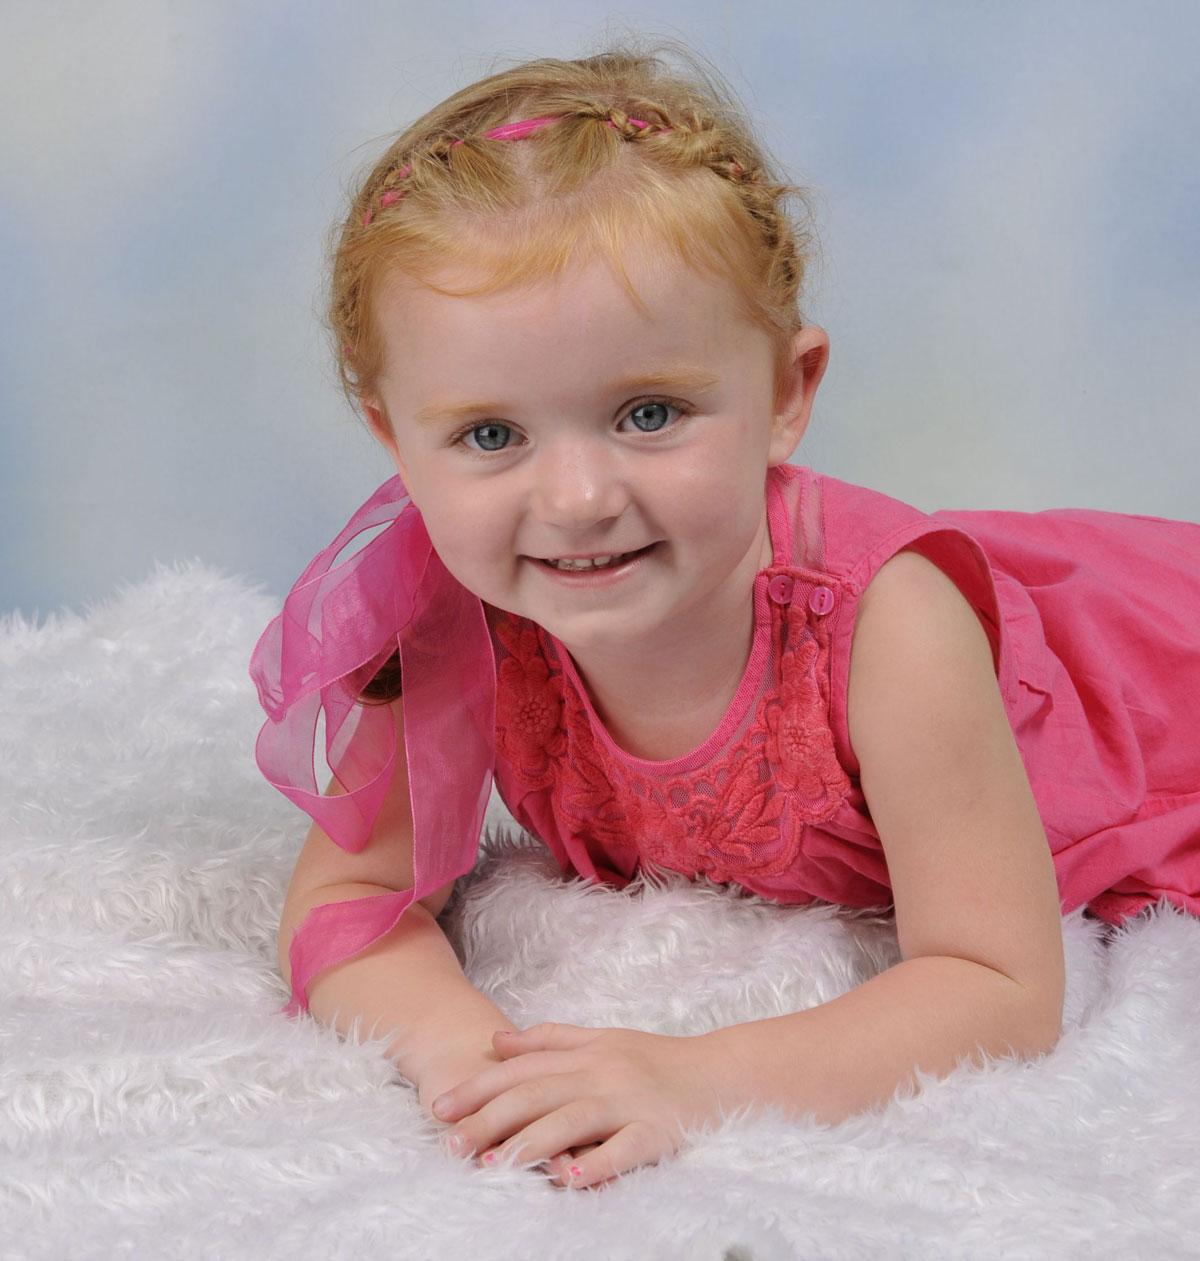 Ava Rae Ashford - winner of the 19 to 35 months category